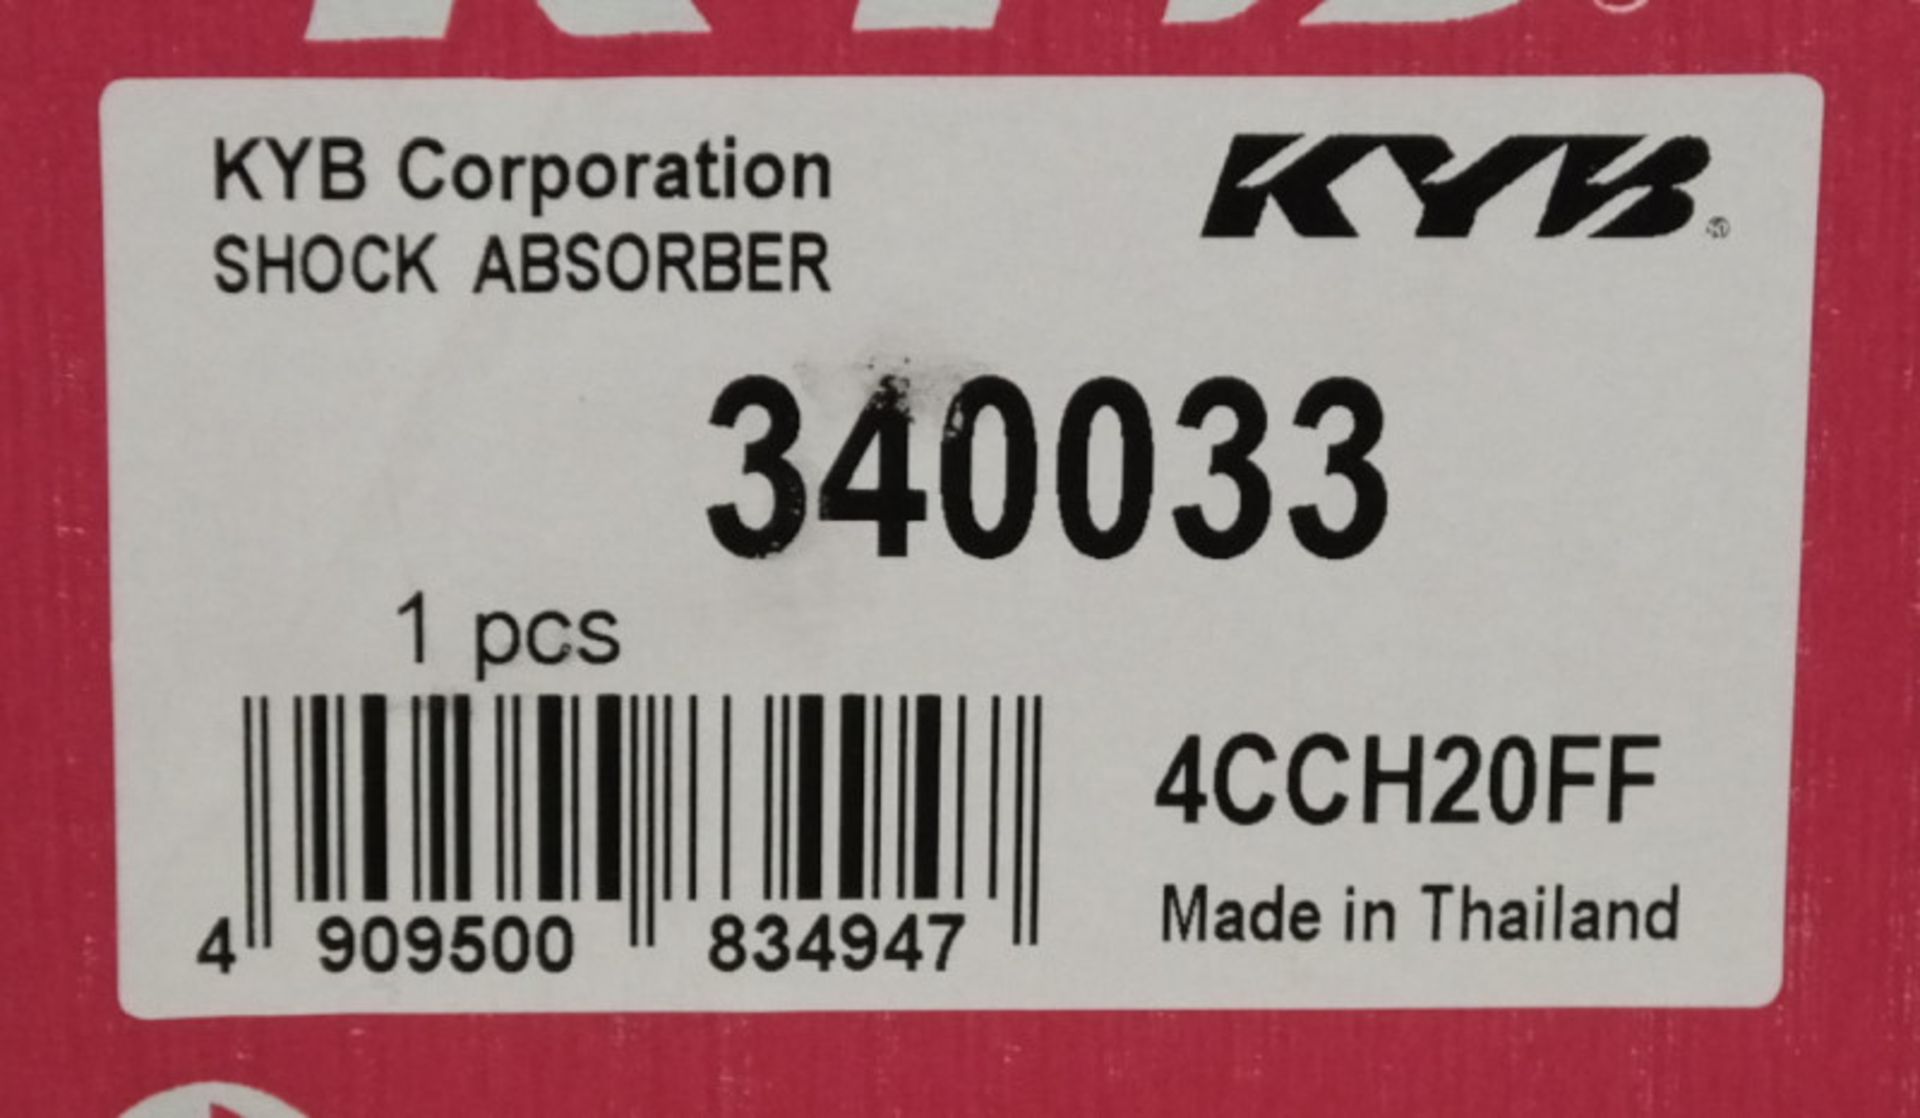 2x KYB 340033 Gas Shock Absorbers - Image 2 of 2